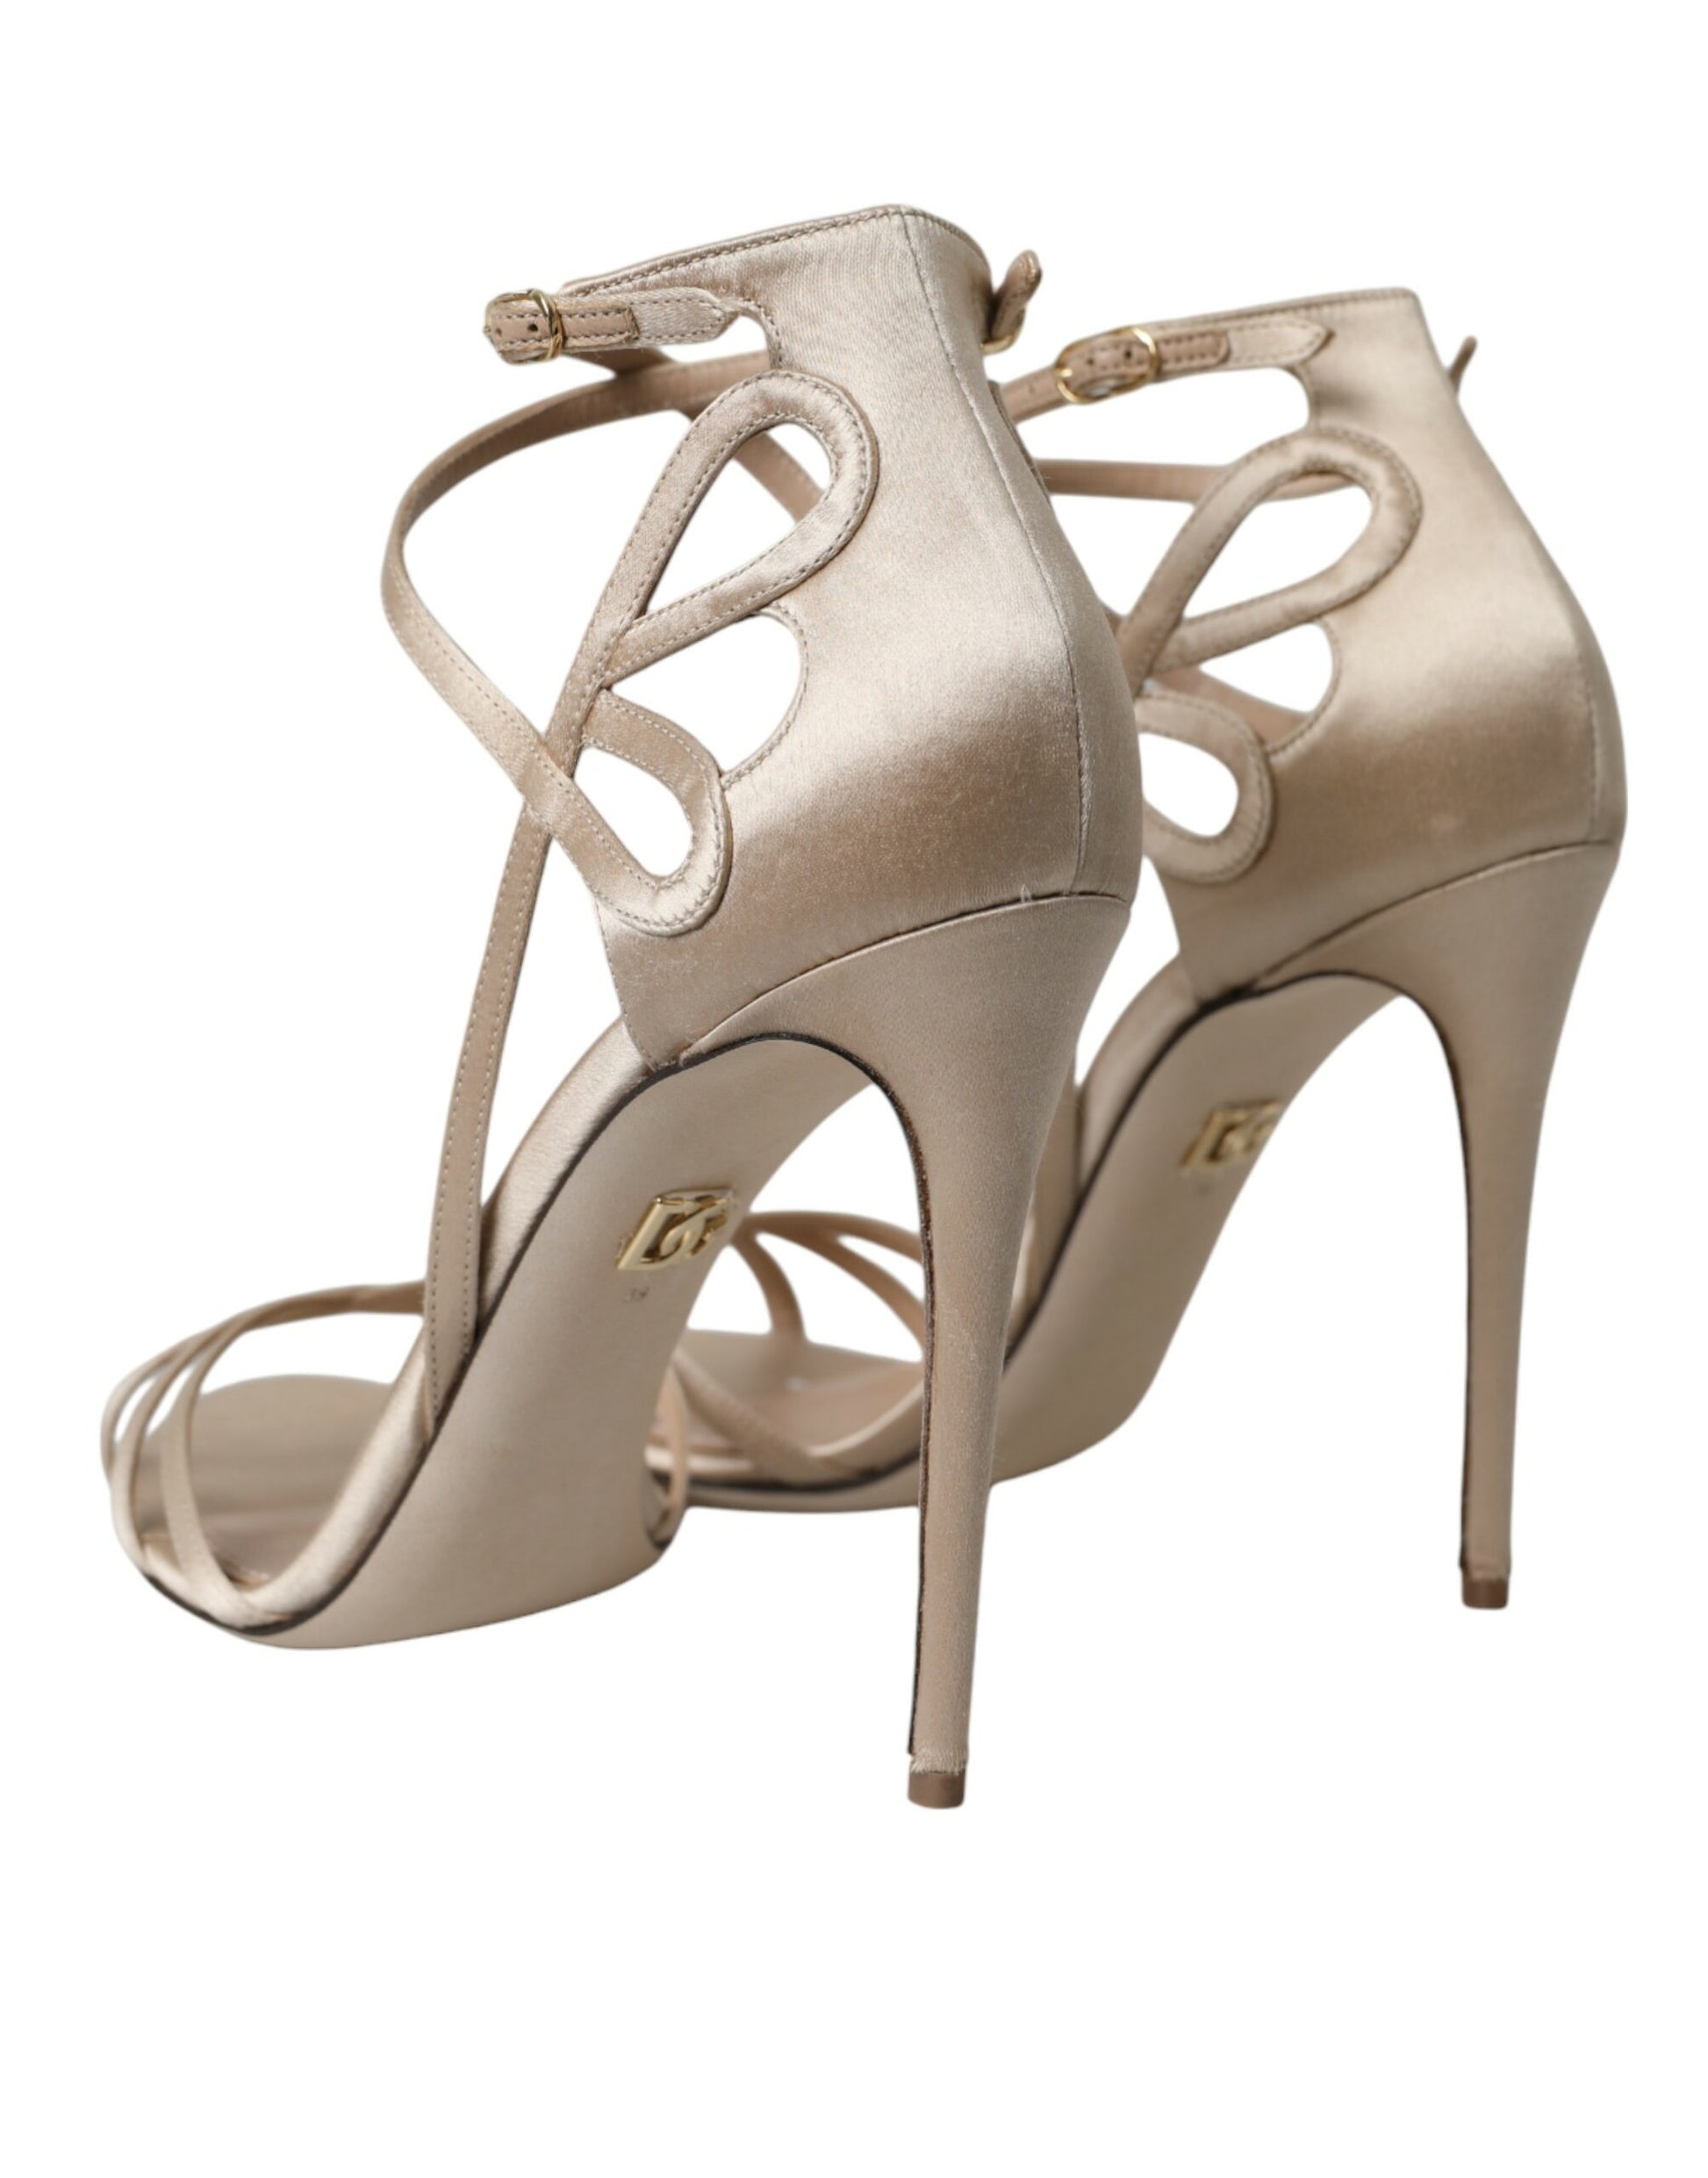 Beige Leather Strappy Heels Sandals Shoes